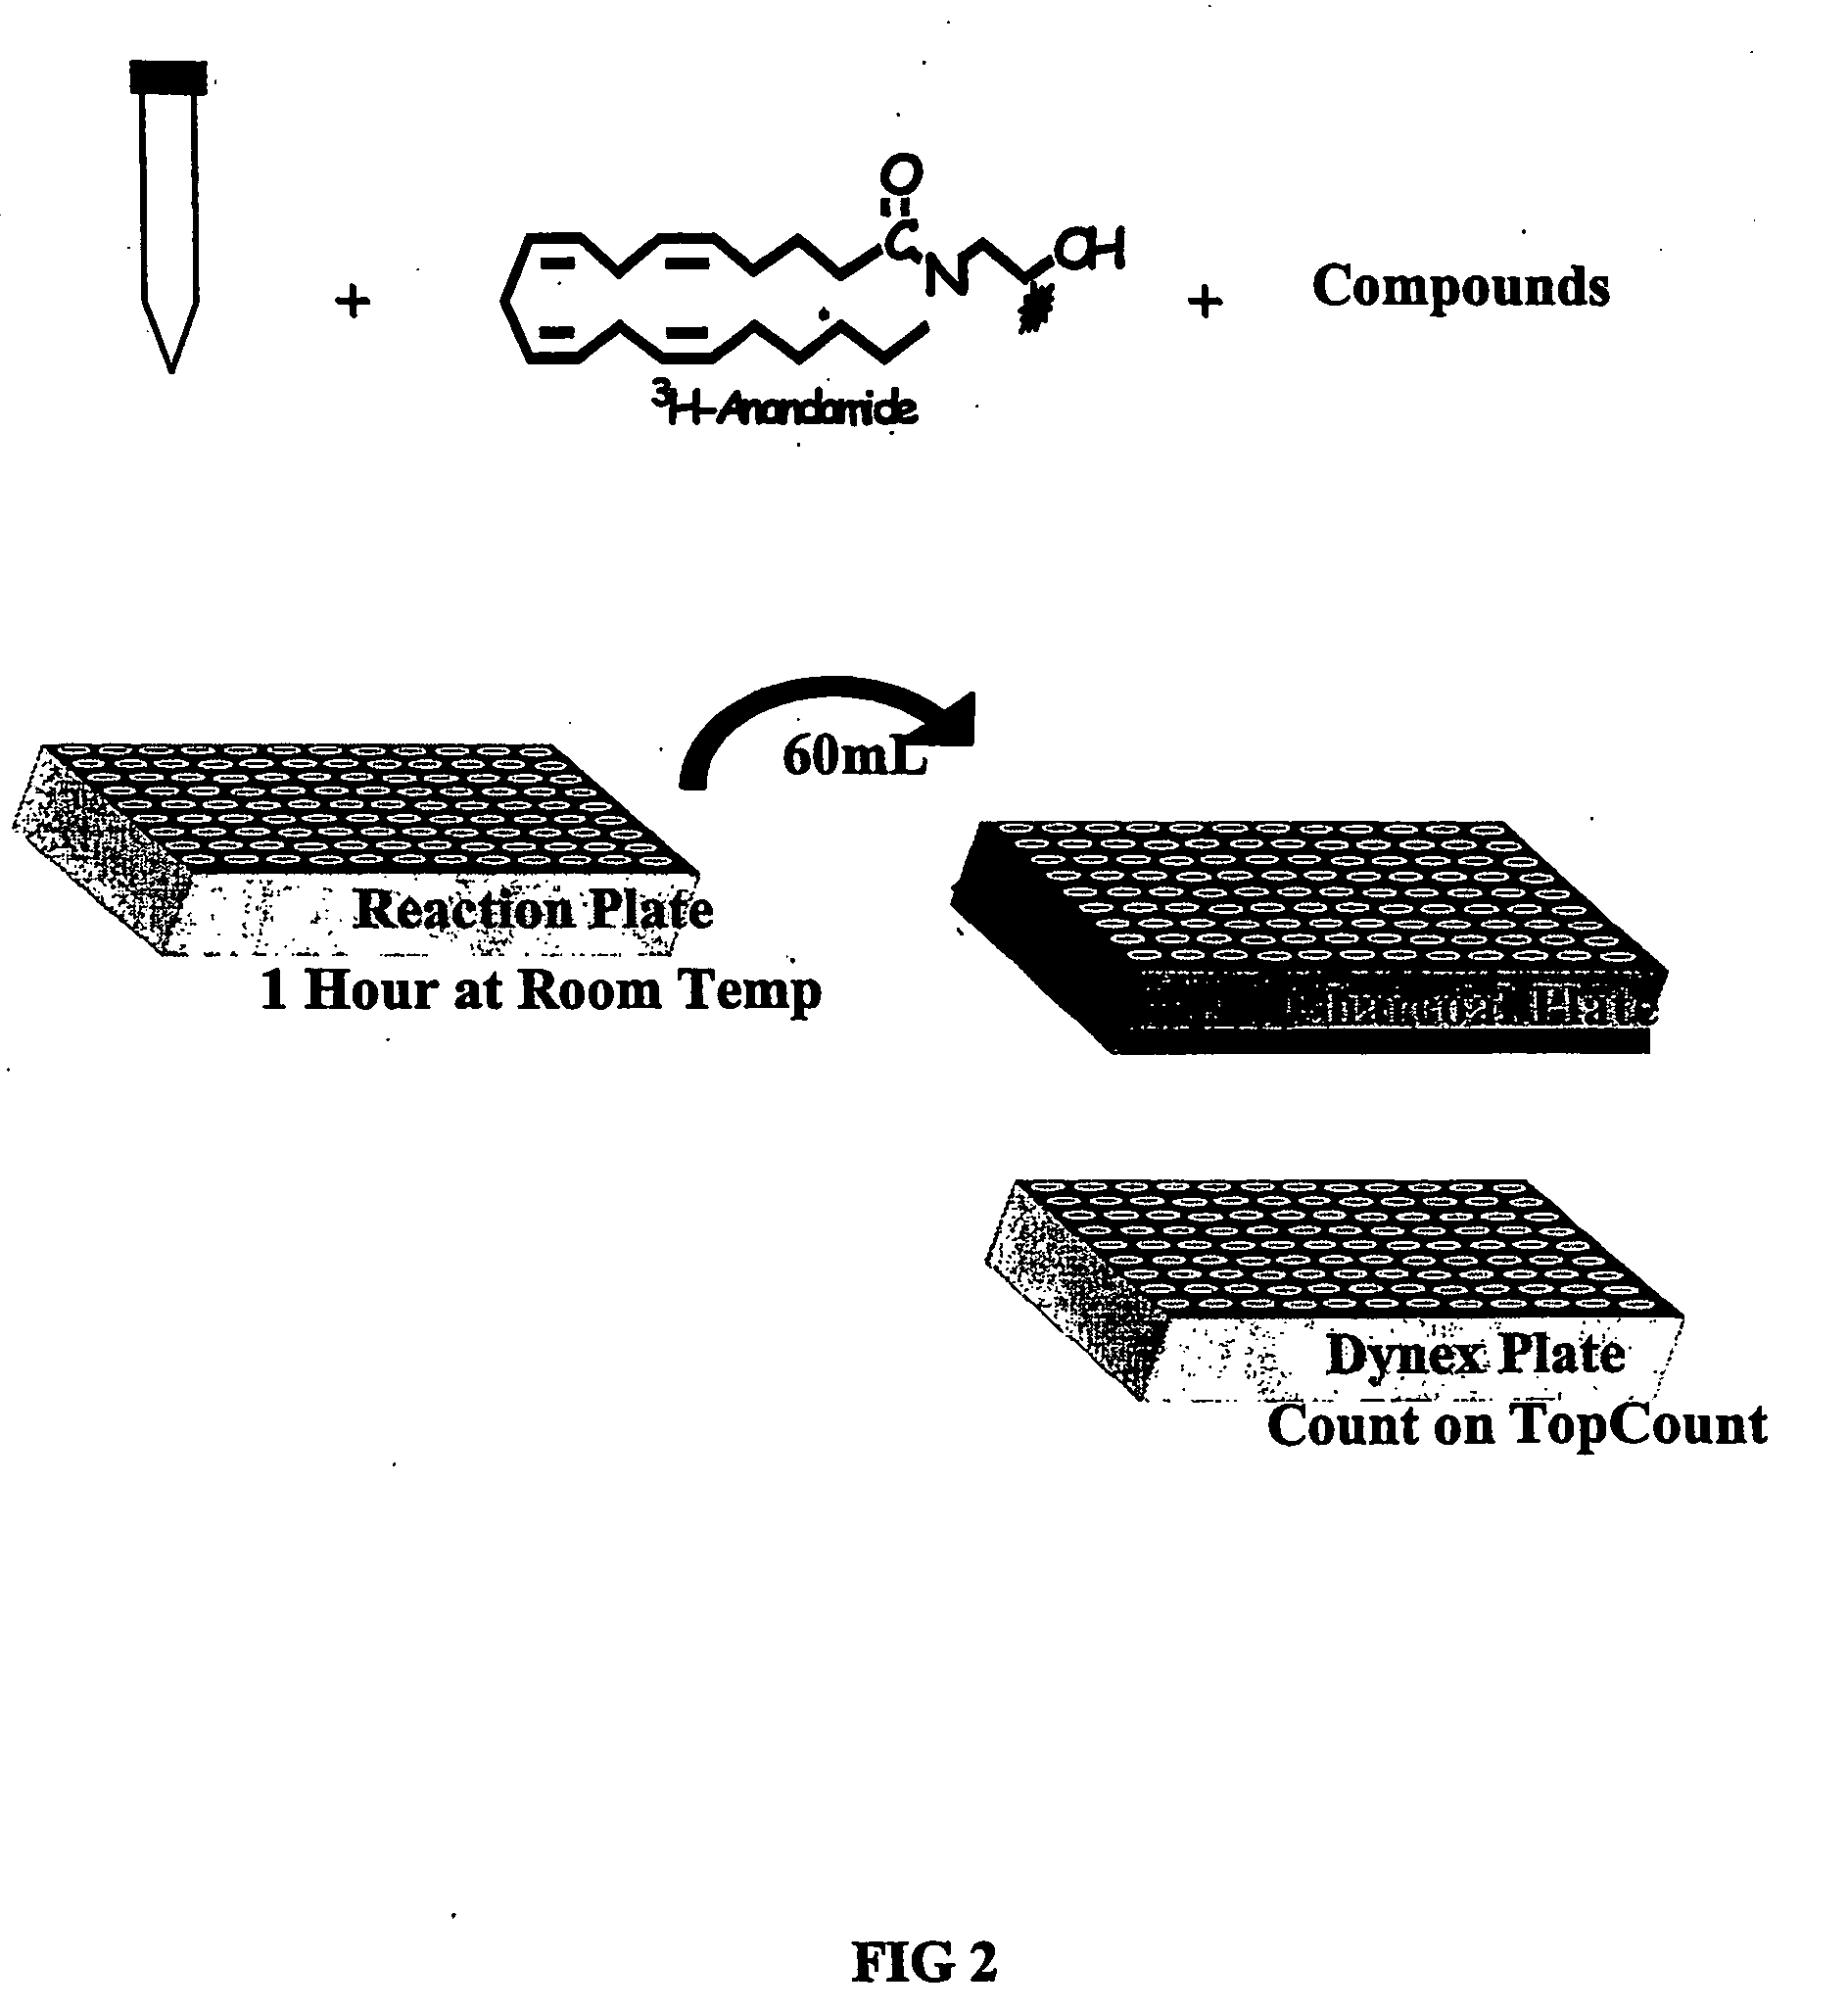 Assay for determining the activity of fatty acid amide hydrolase